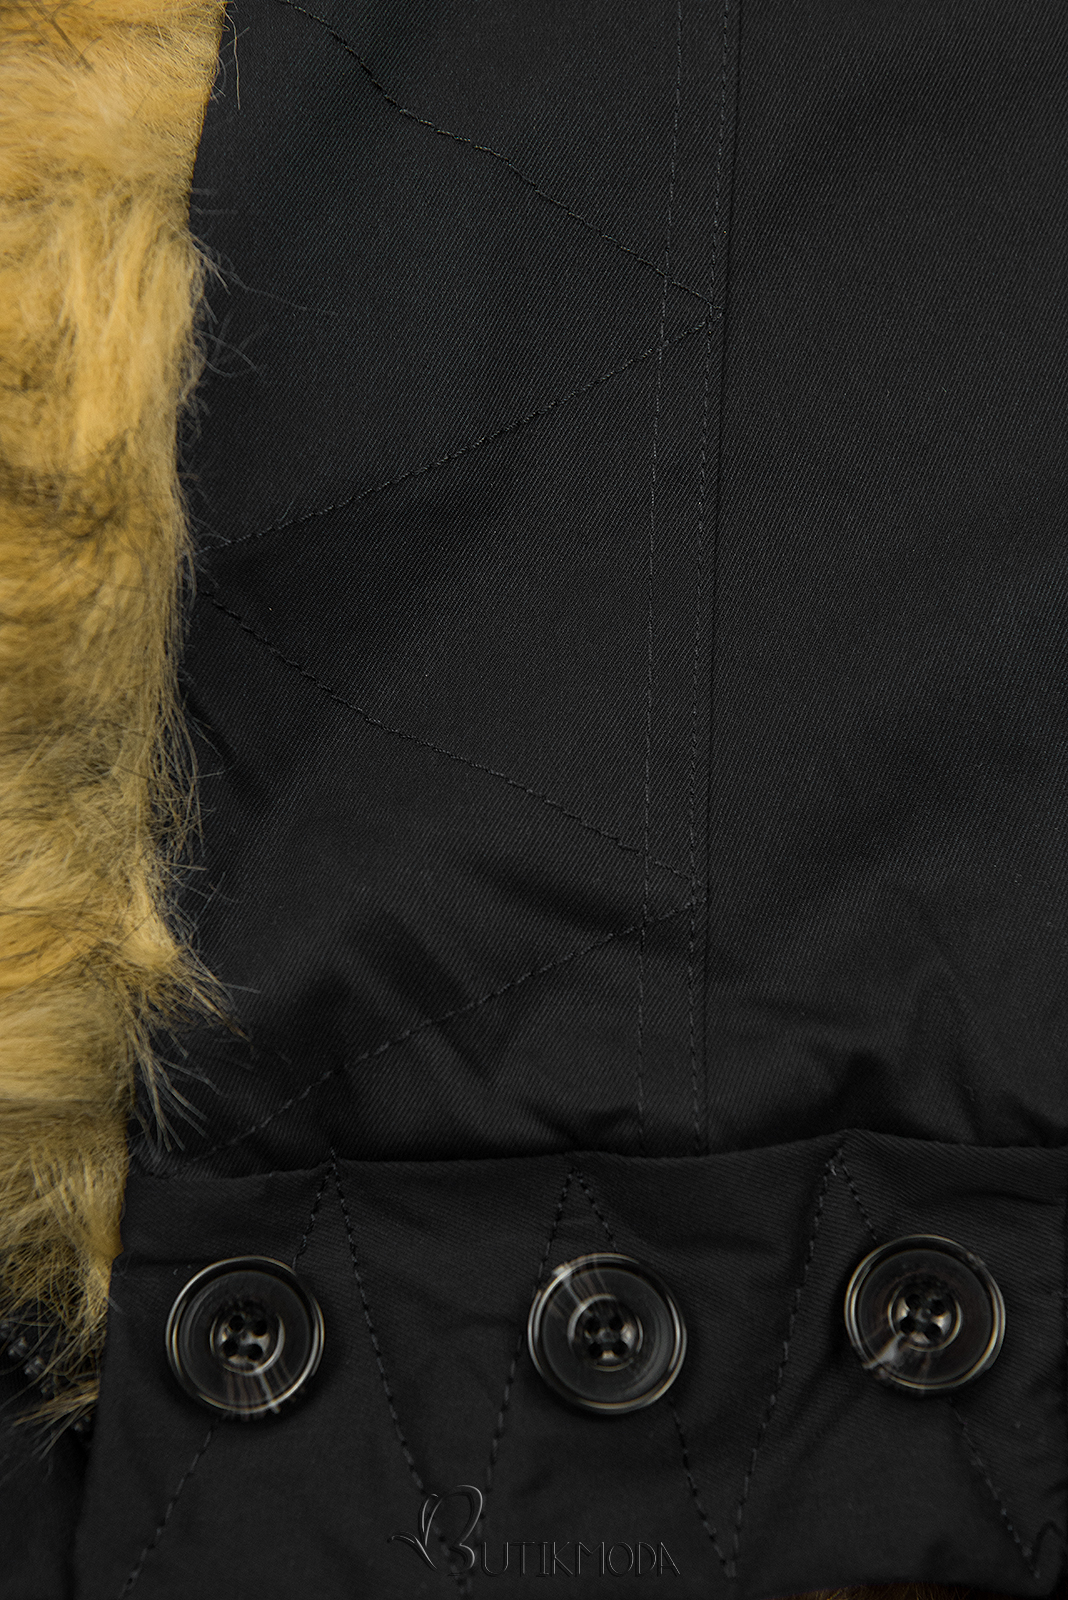 Black winter parka with high collar